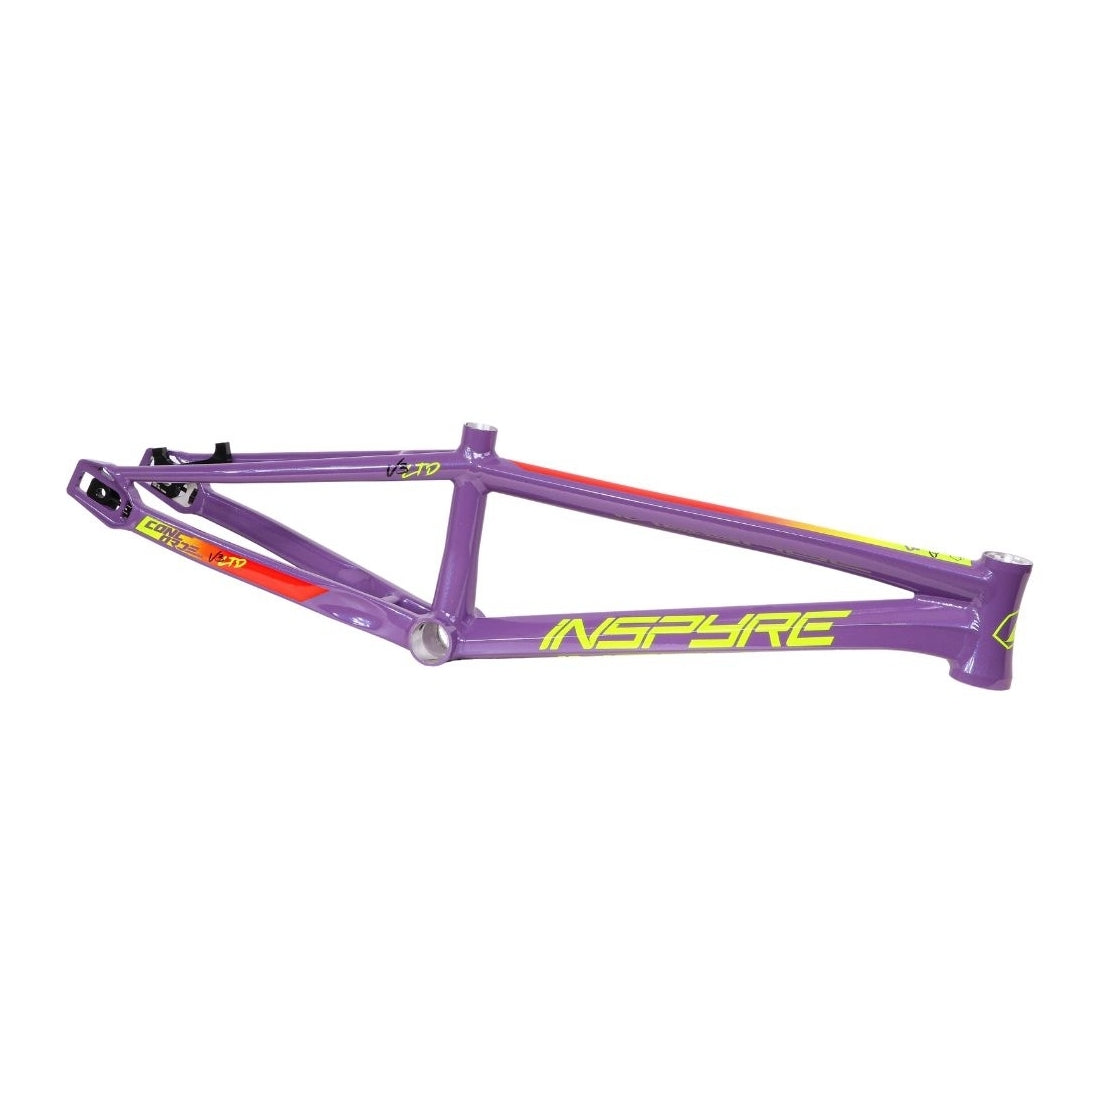 Purple Inspyre Concorde V3 Pro XL BMX race frame with branding decals on a white background.